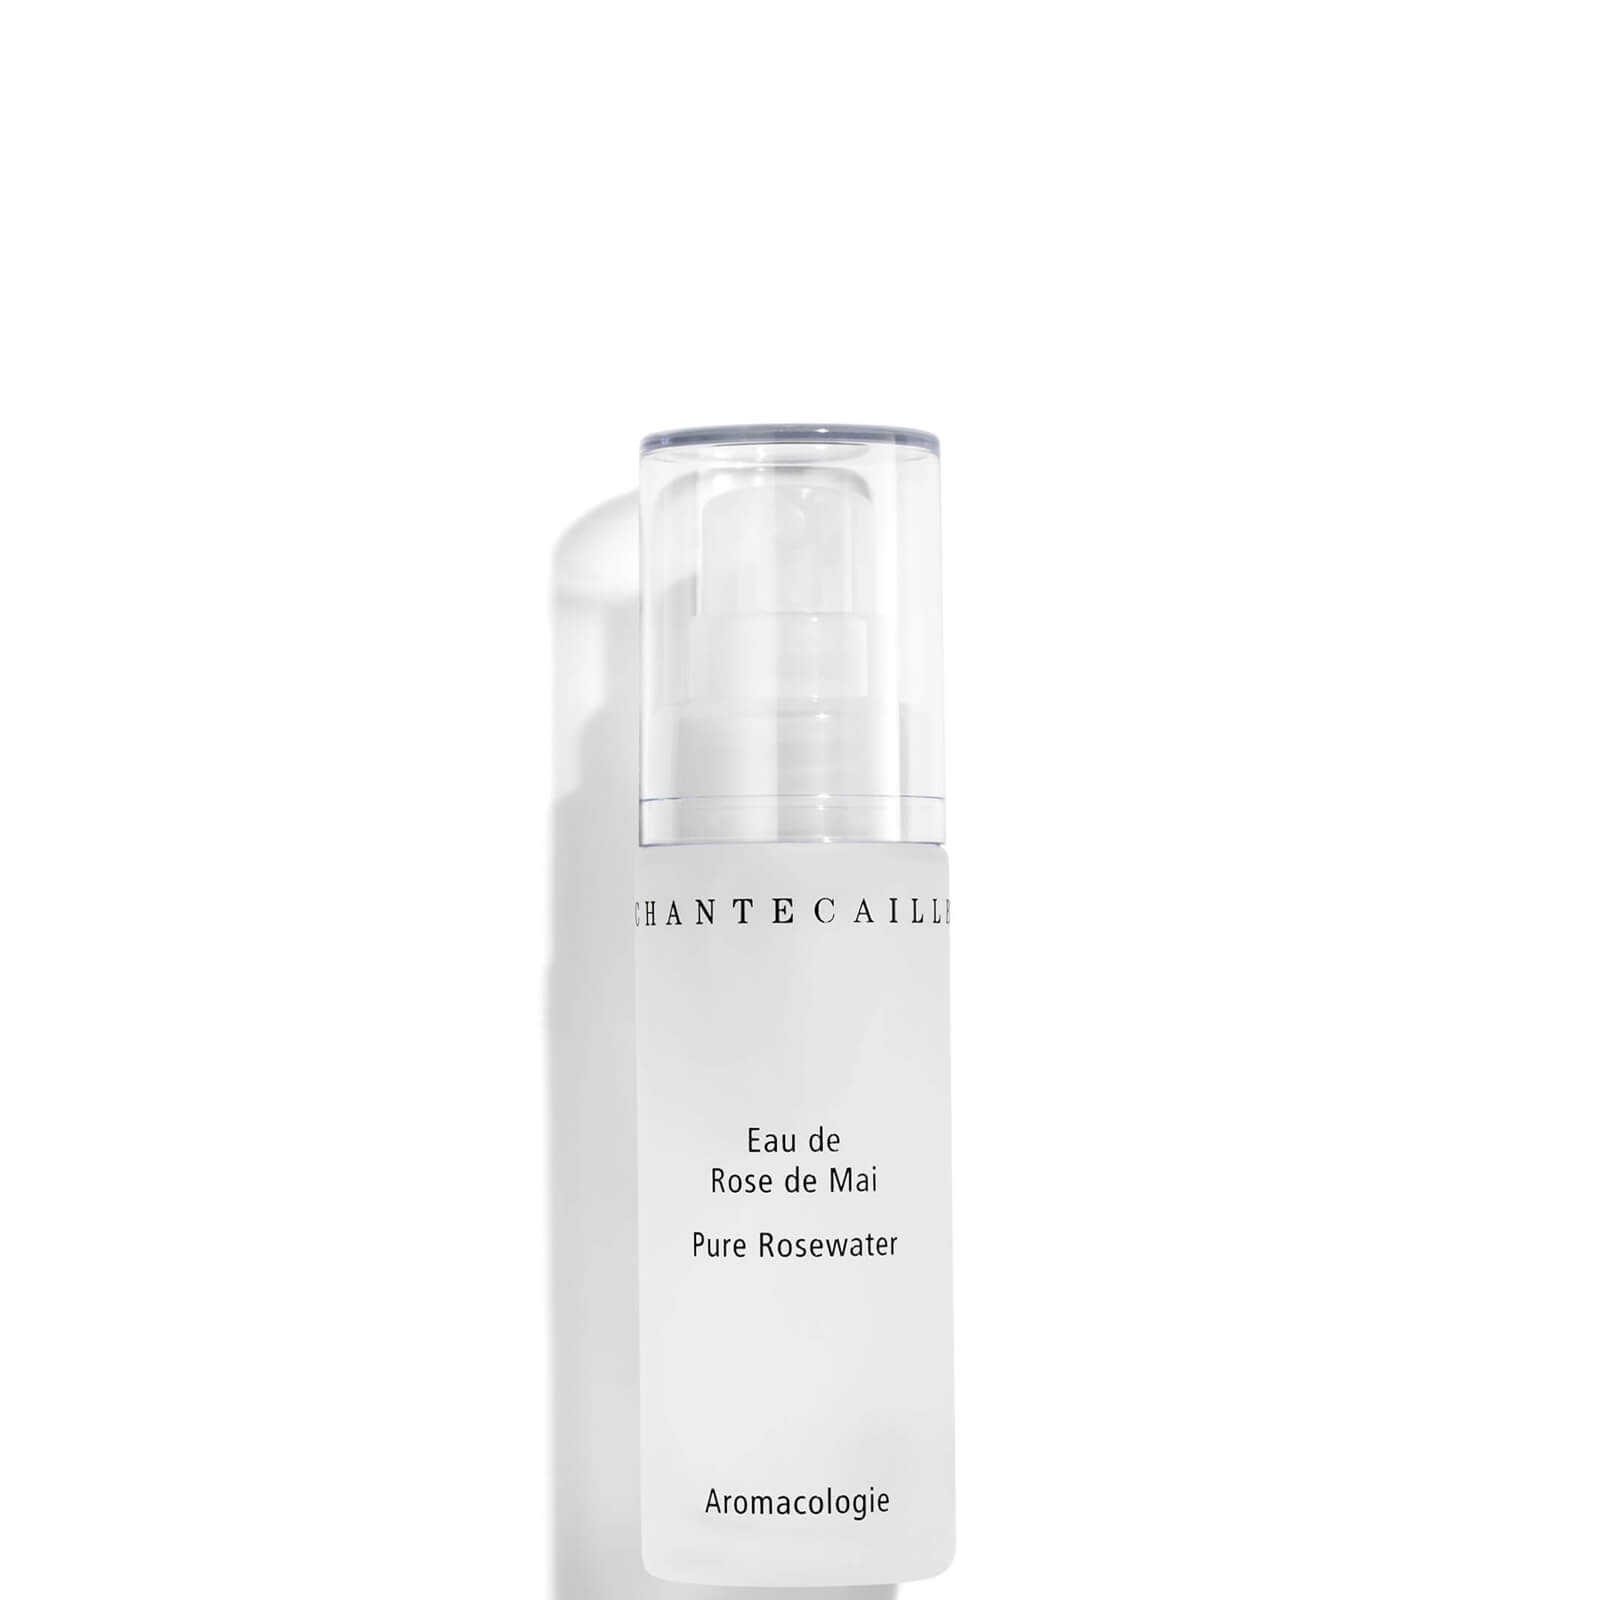 Image of Chantecaille Pure Rosewater Travel Size 25ml